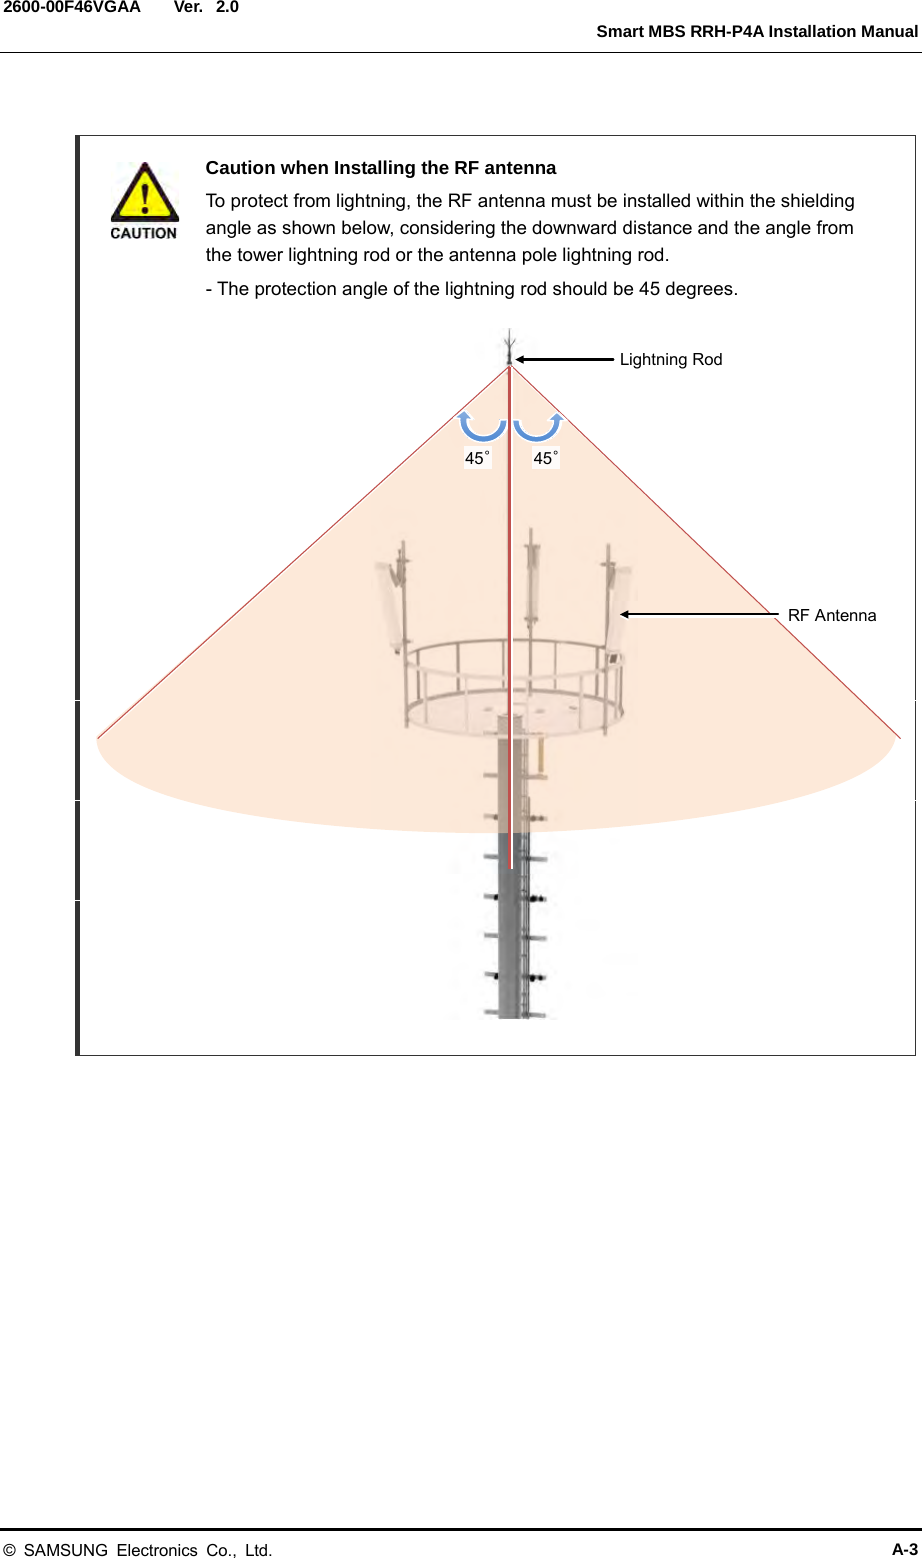  Ver.   Smart MBS RRH-P4A Installation Manual 2600-00F46VGAA 2.0   Caution when Installing the RF antenna  To protect from lightning, the RF antenna must be installed within the shielding angle as shown below, considering the downward distance and the angle from the tower lightning rod or the antenna pole lightning rod.     - The protection angle of the lightning rod should be 45 degrees.                         Lightning Rod 45° 45° RF Antenna © SAMSUNG Electronics Co., Ltd. A-3 